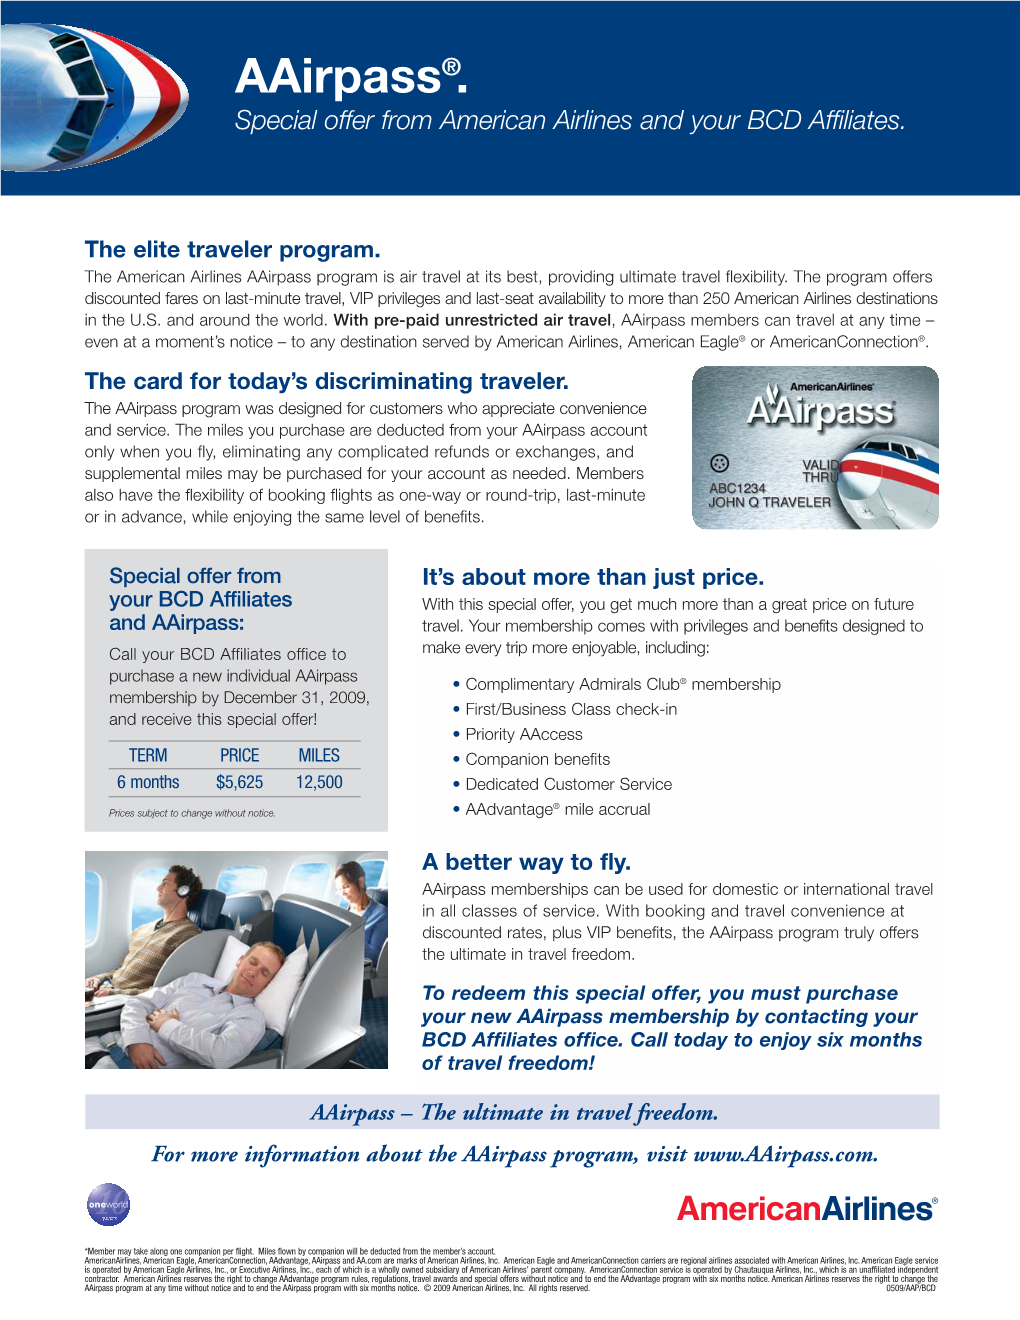 Aairpass®. Special Offer from American Airlines and Your BCD Affiliates